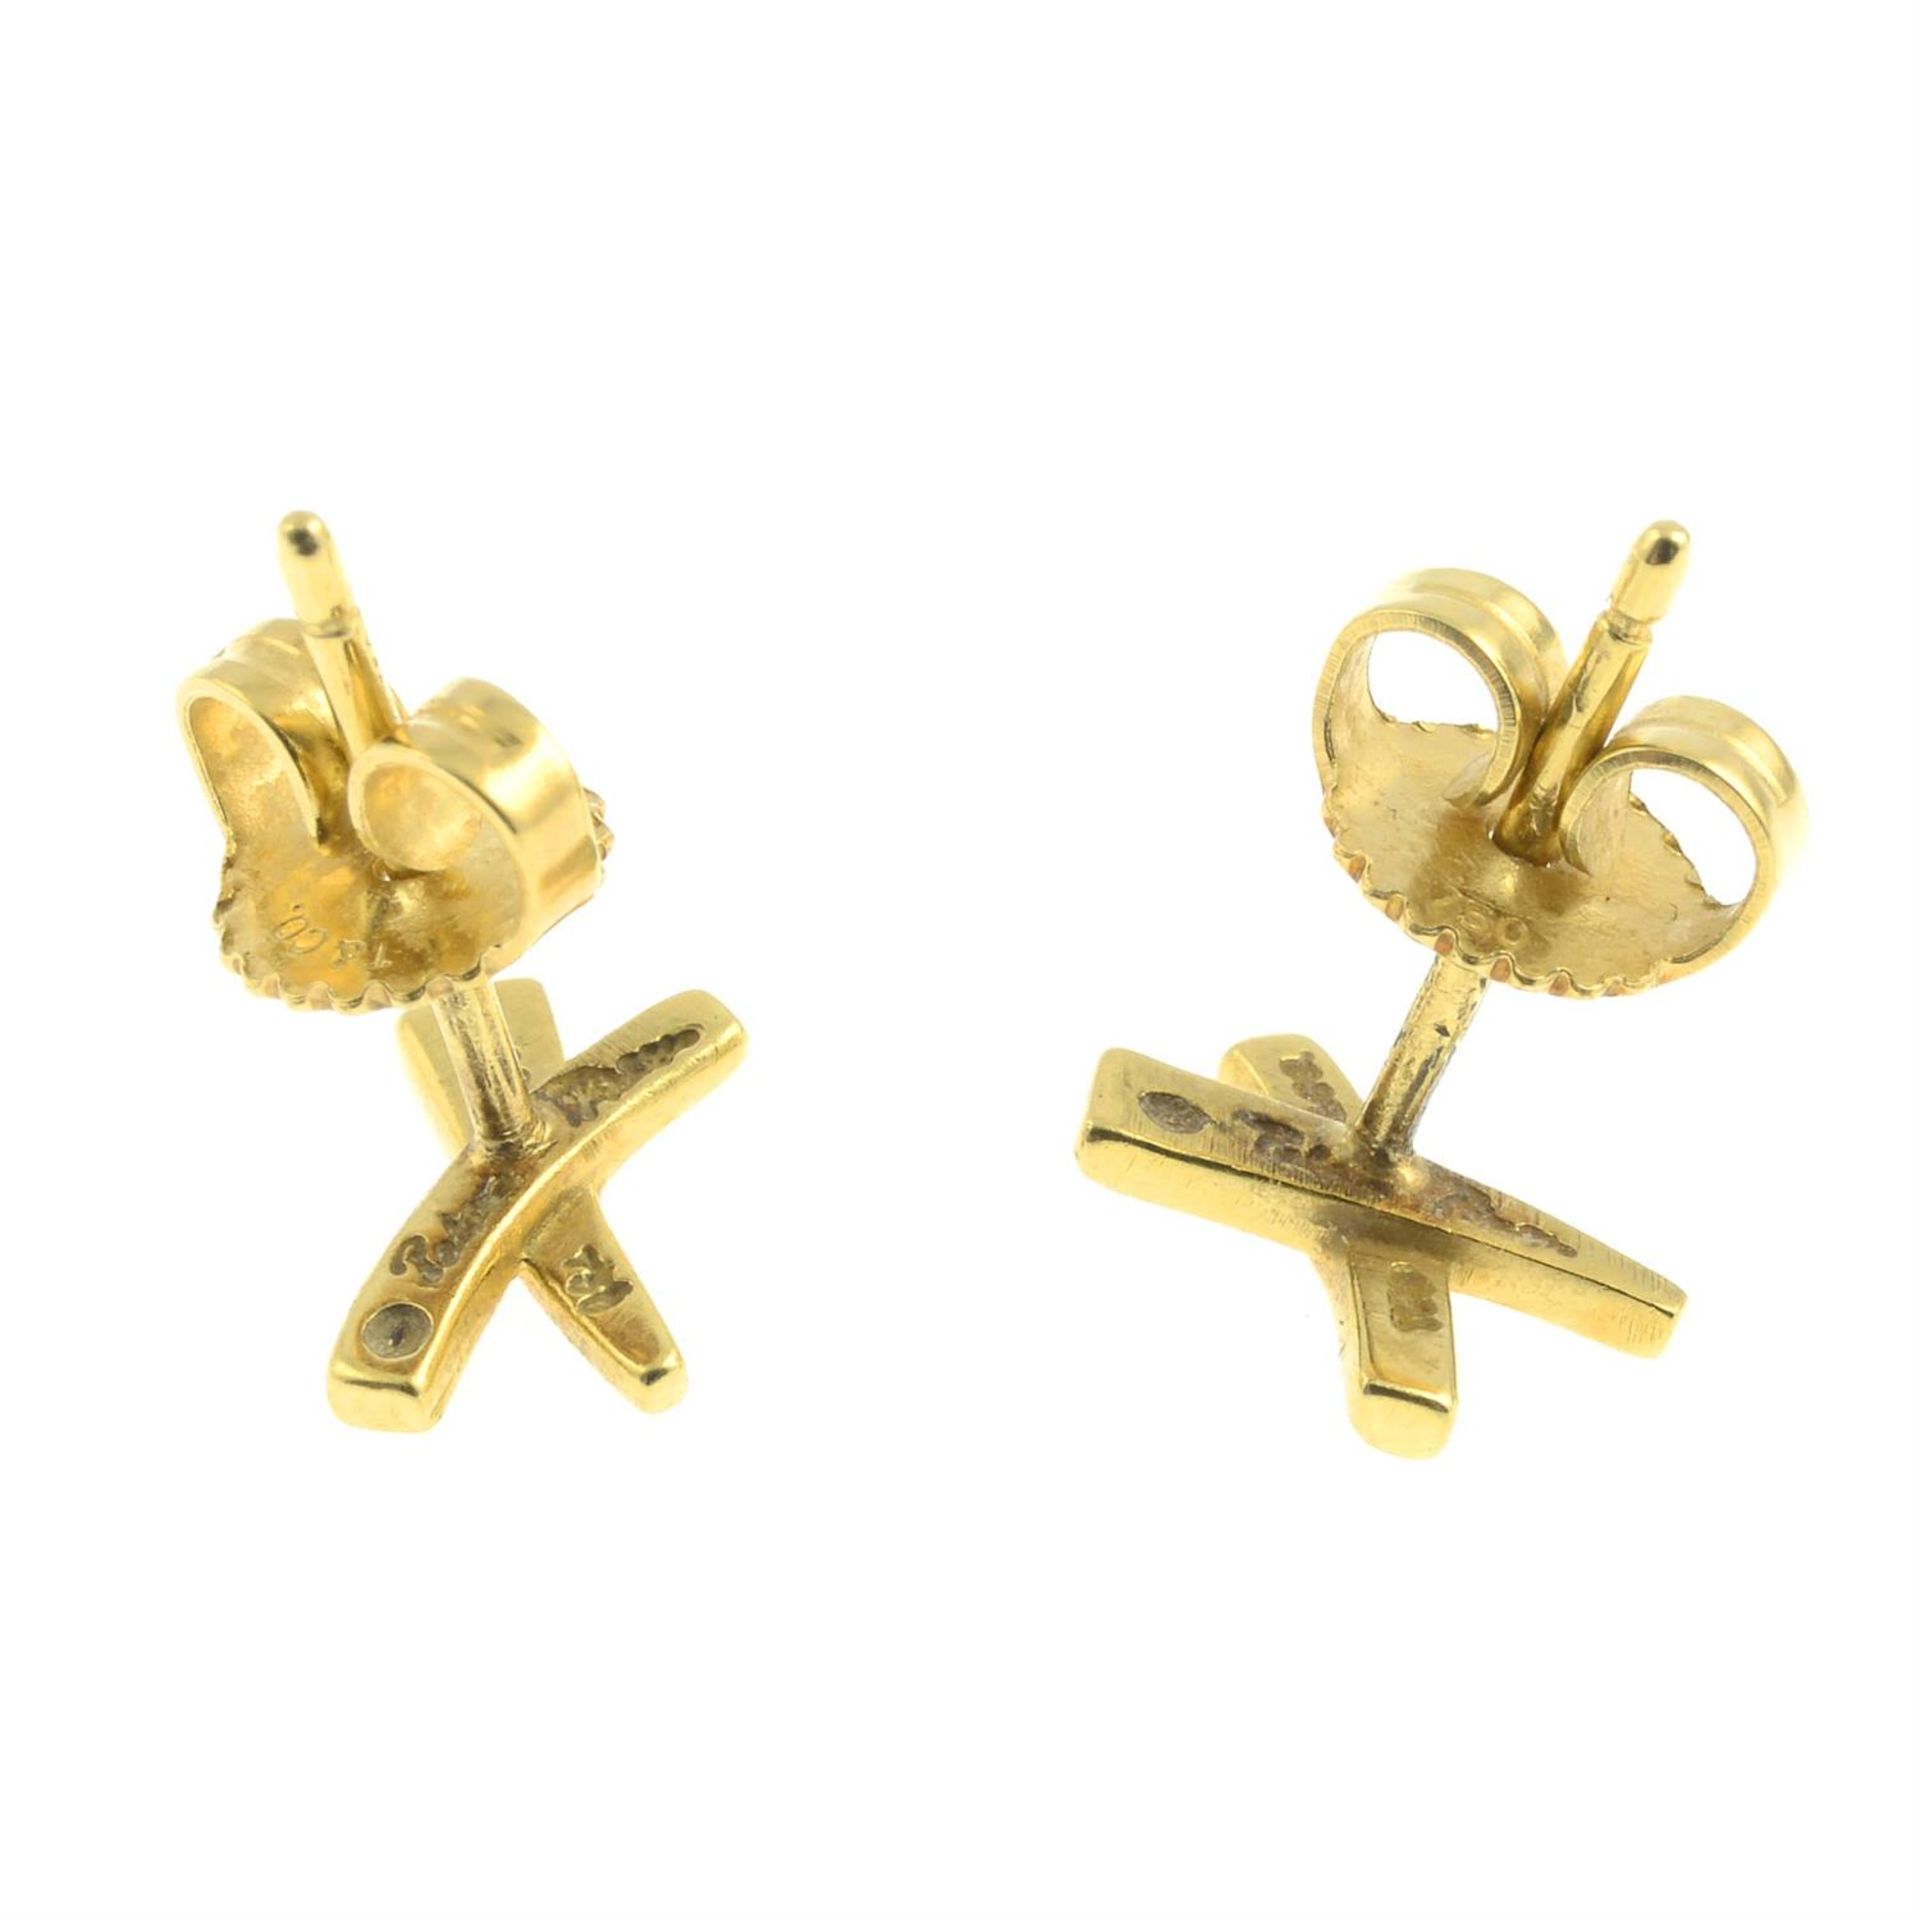 A pair of 'Graffiti X' stud earrings, Paloma Picasso for Tiffany & Co. - Image 2 of 2